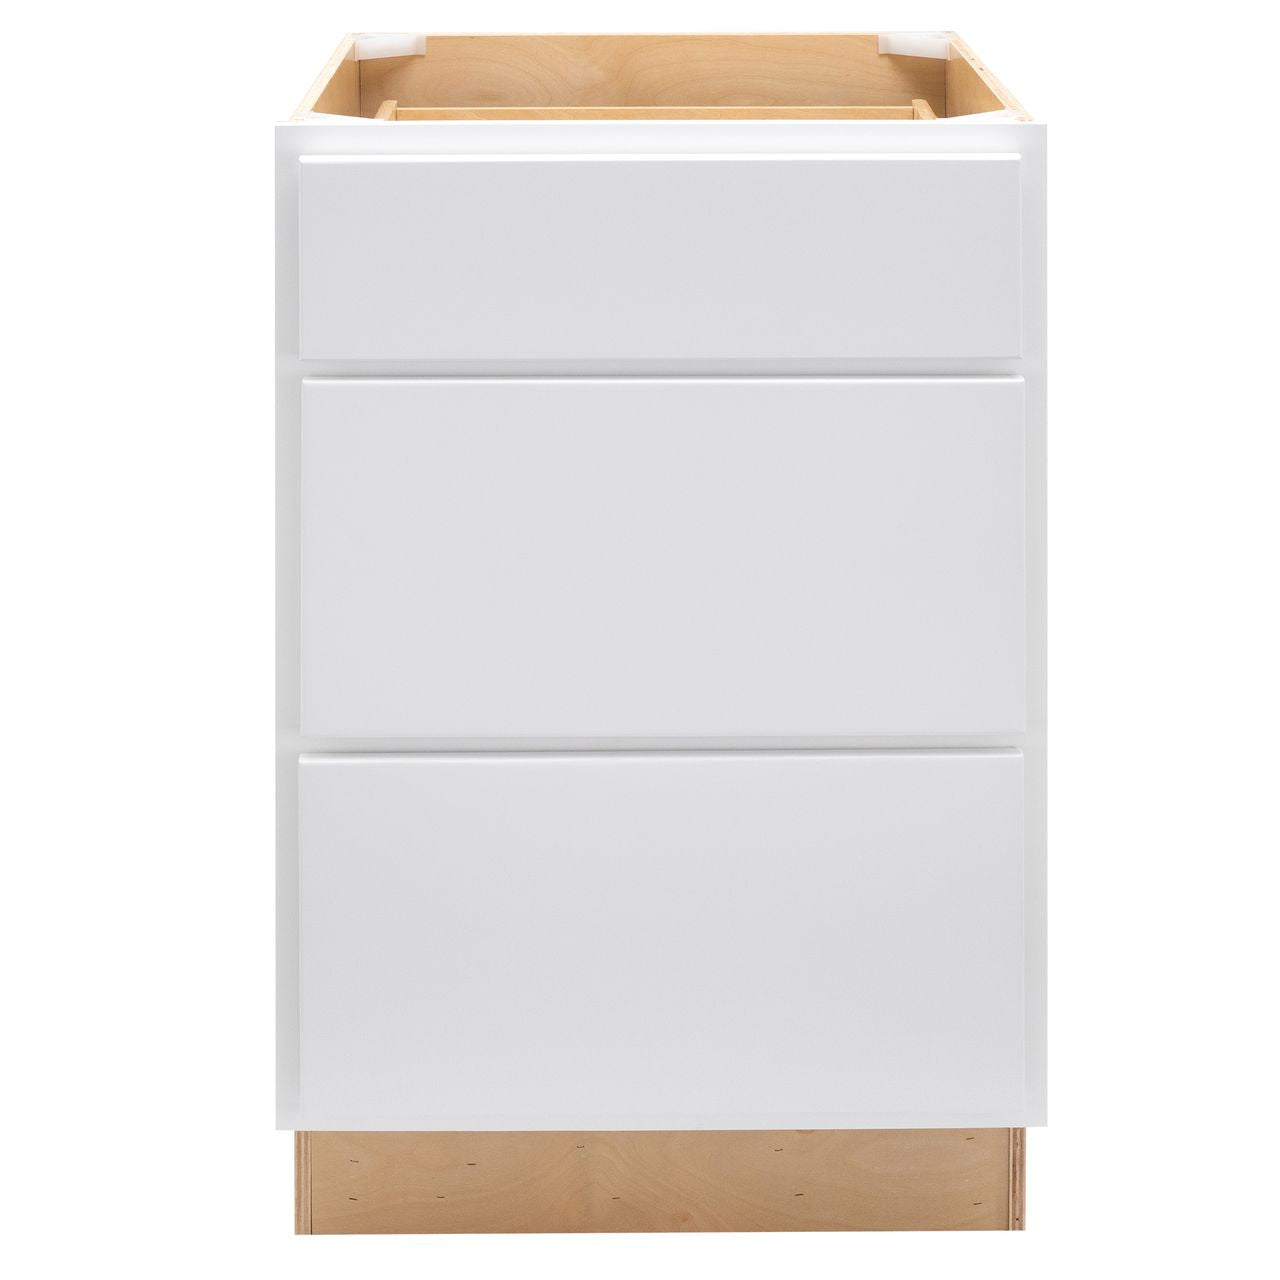 Quicklock Pure White 3 Drawer Pots and Pans Base Cabinet- Medium (18", 21", 24"W)